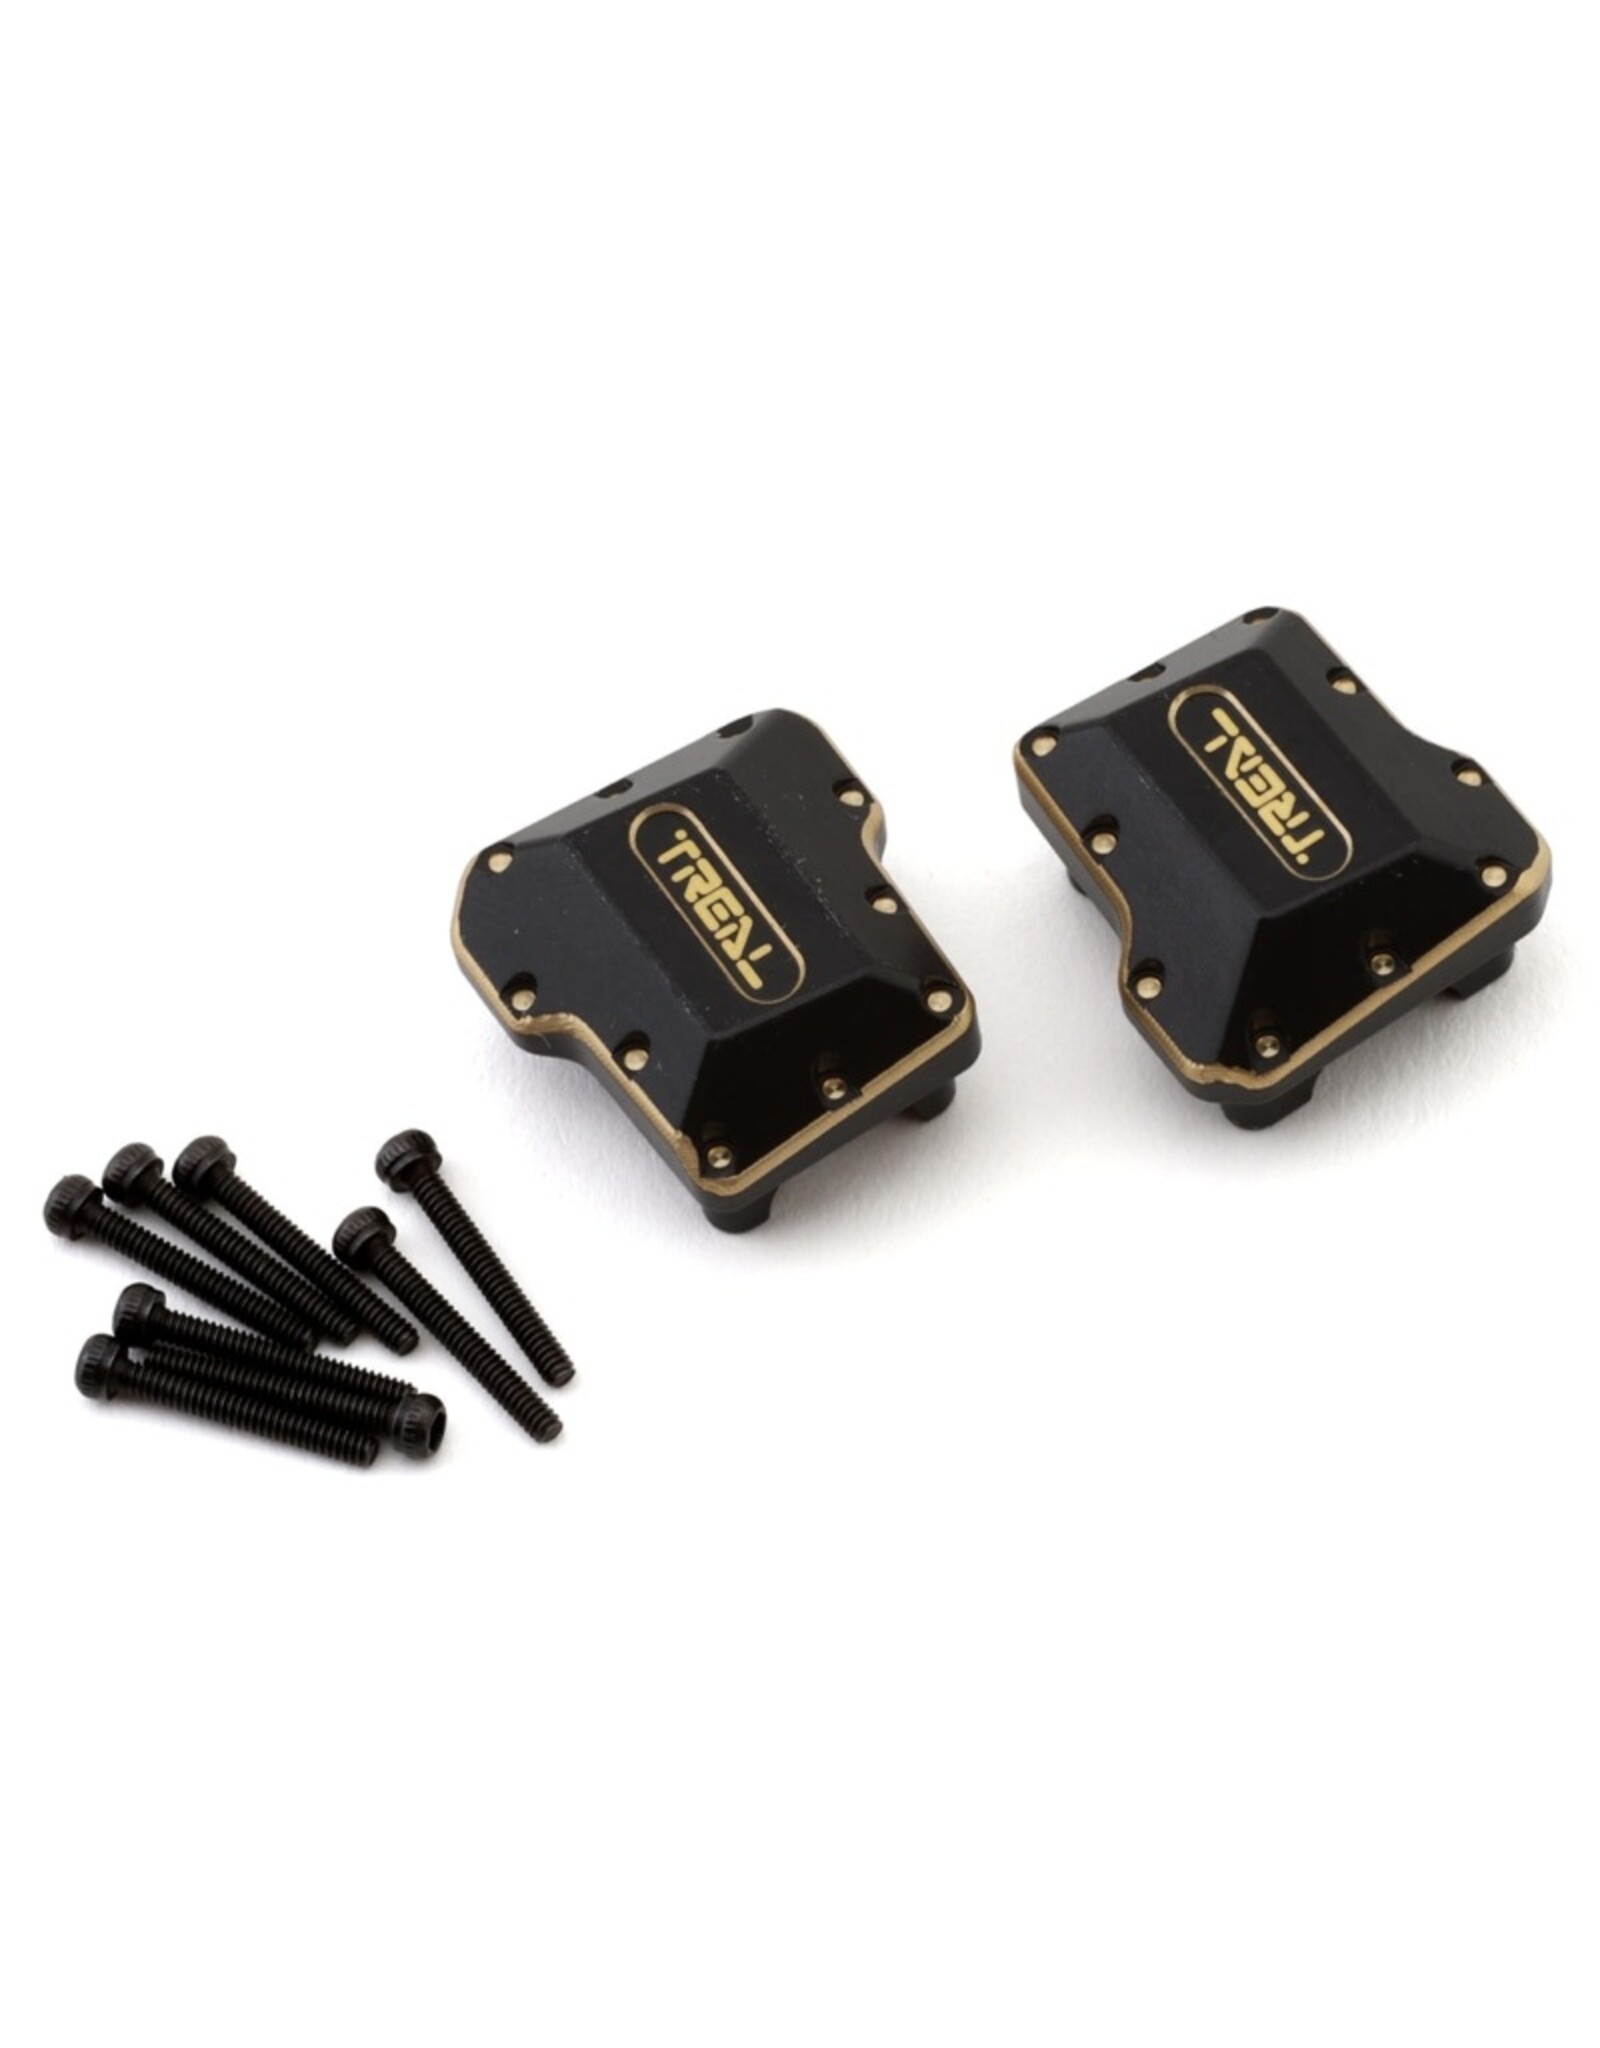 treal TLHTTRX-4M-04 TRX-4M Brass Axle Differential Covers (Black) (2) (15.8g)